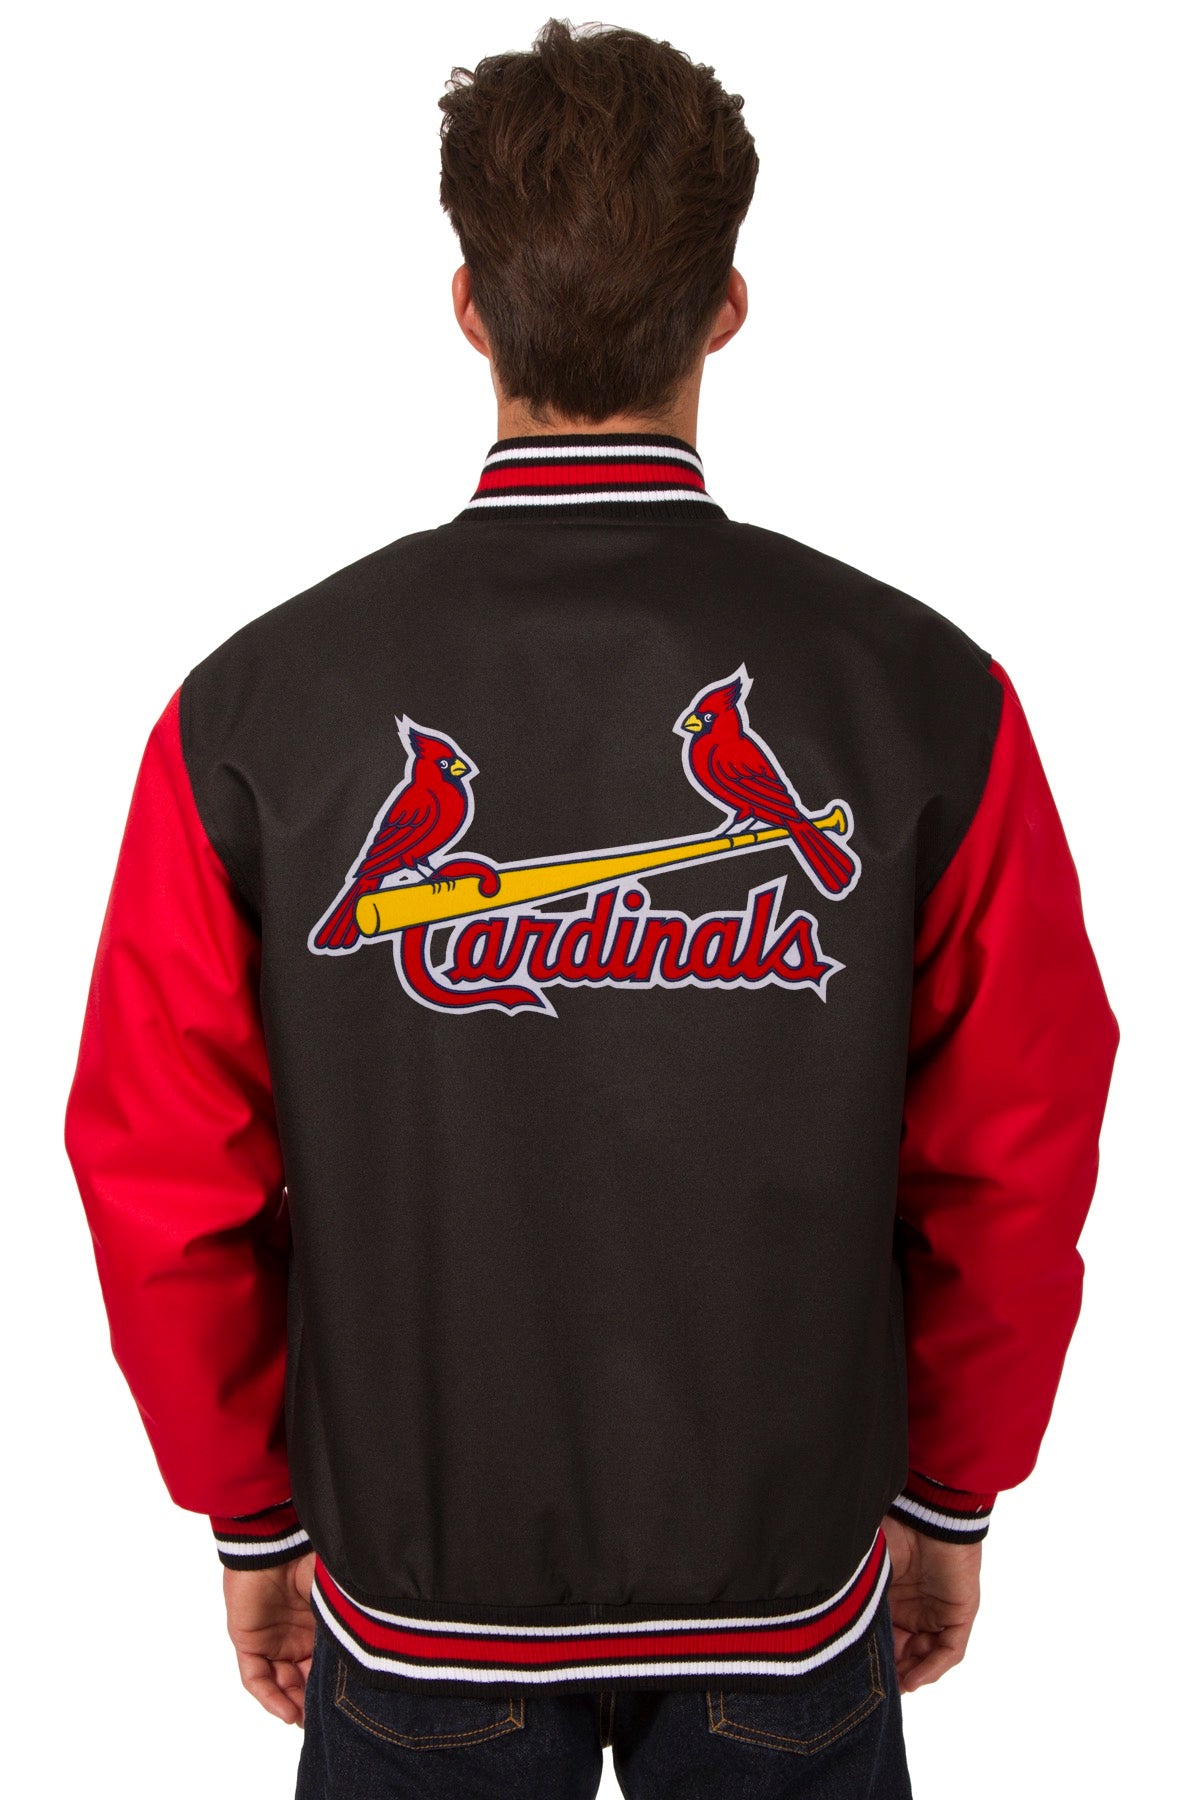 St. Louis Cardinals Poly-Twill Jacket